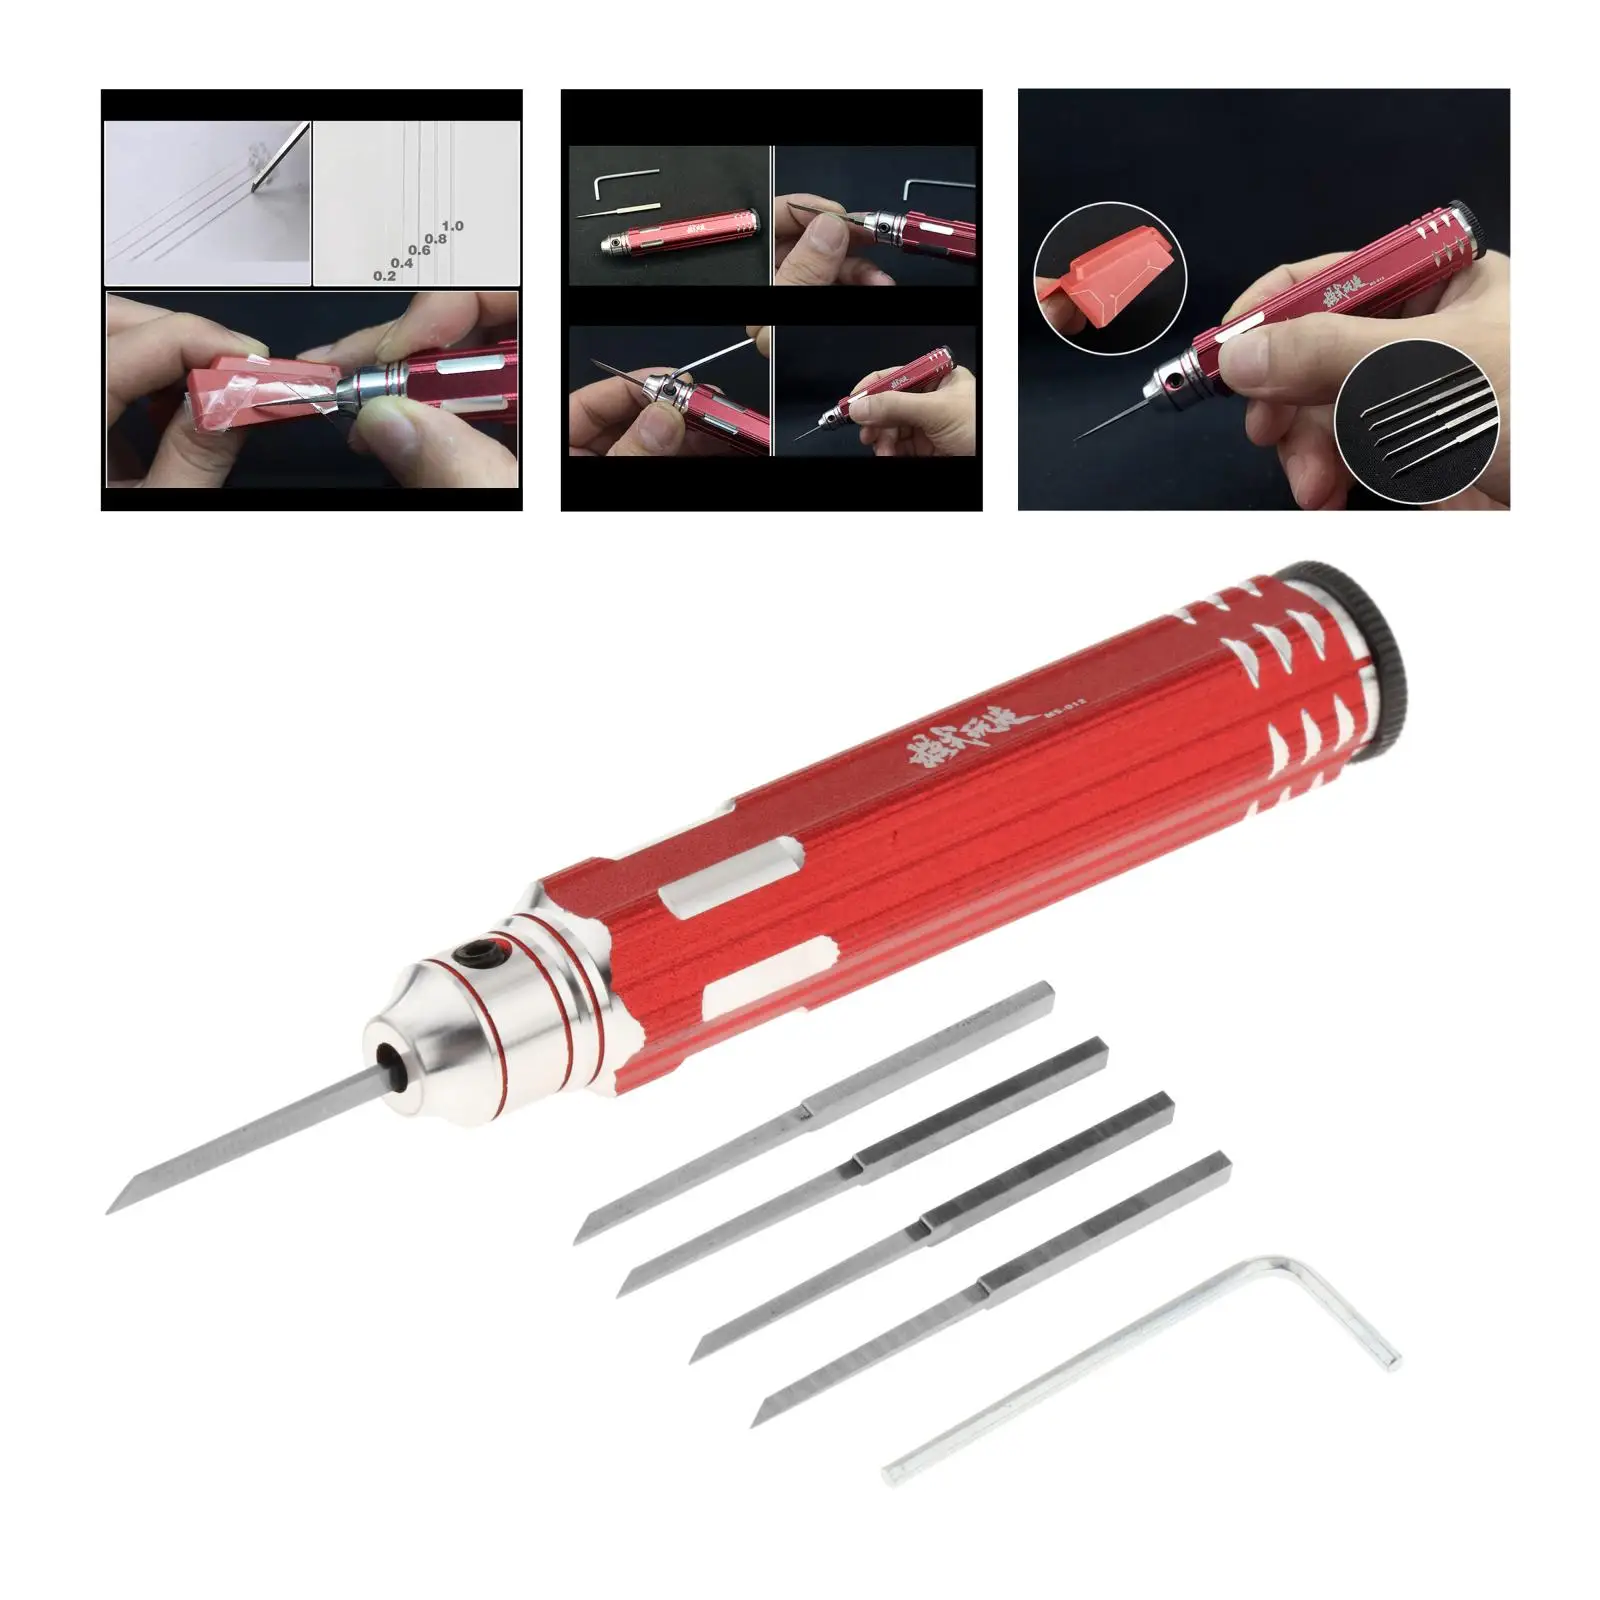 

Model Scriber w/ Blade Resin Carved Scribe line Hobby Cutting Tool with 5 Blades 0.2/0.4/0.6/0.8/1.0mm Tools for RC Car